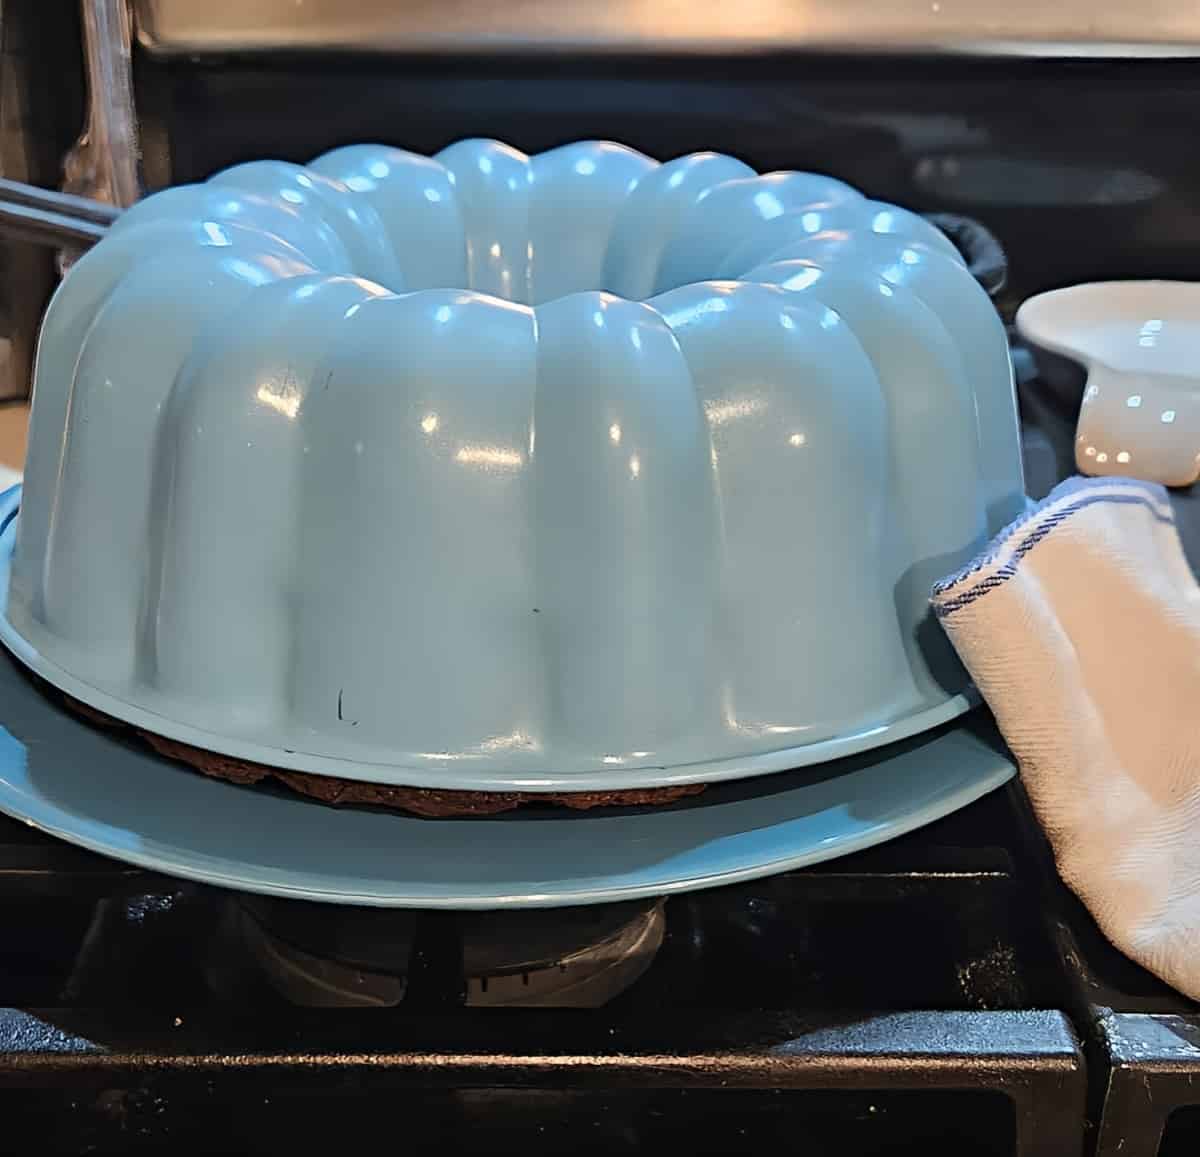 bundt pan on top of plate, being lifted to reveal zucchini bread inside